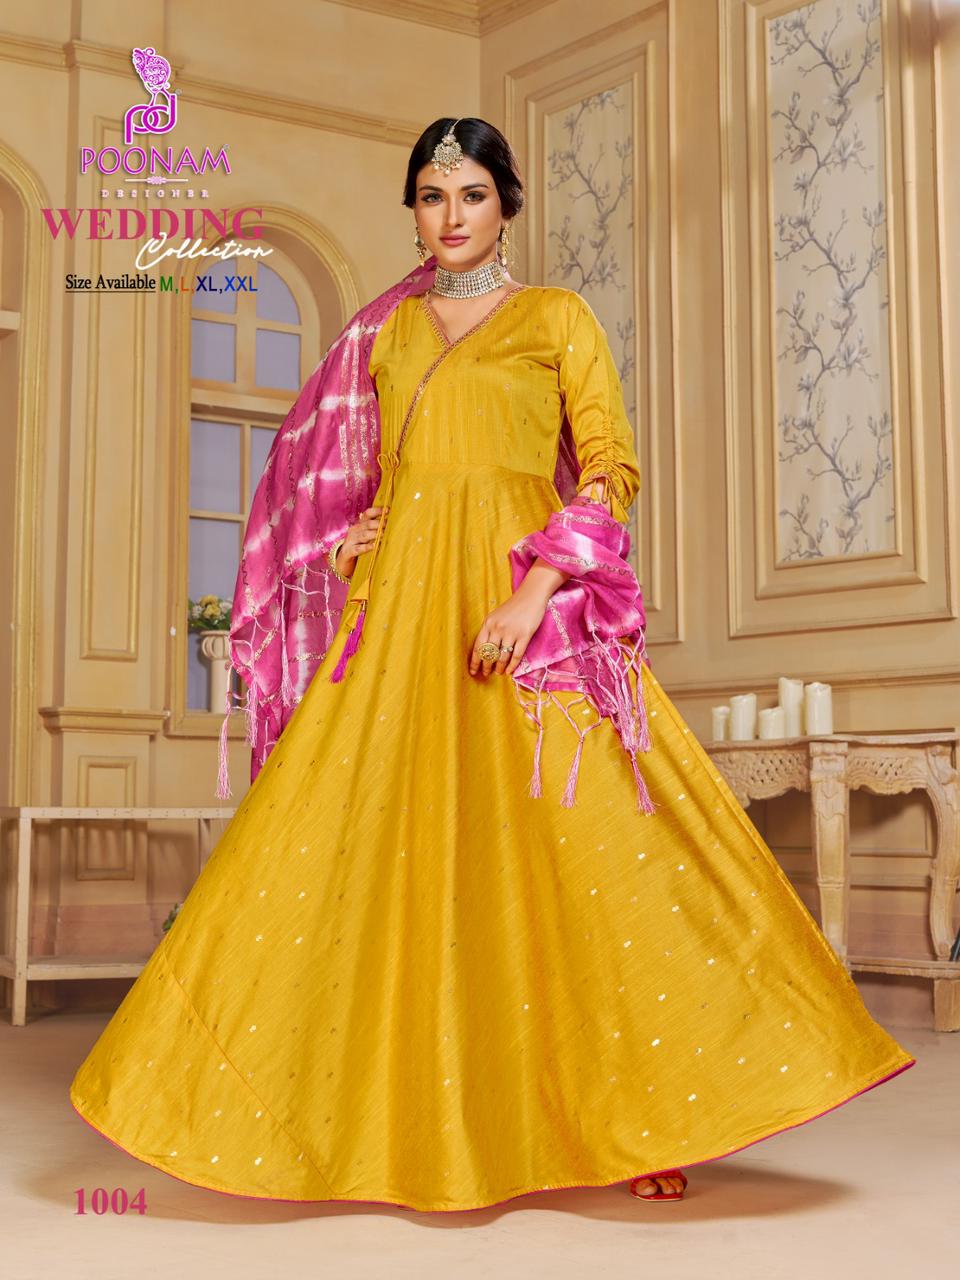 Poonam Wedding Collection collection 6